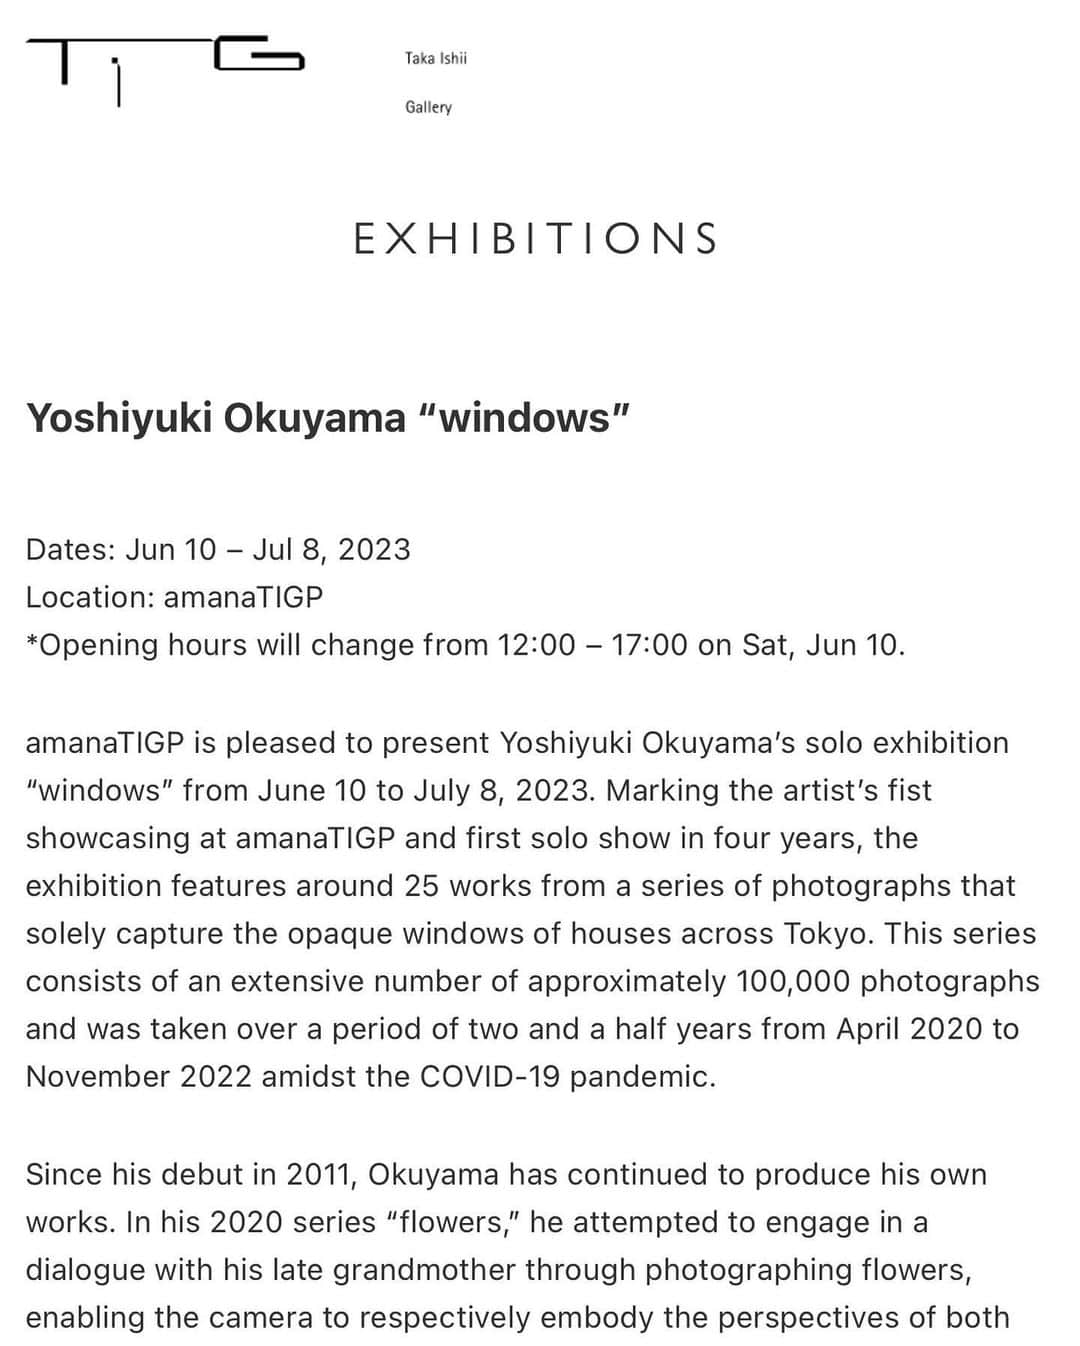 奥山由之のインスタグラム：「I will hold a solo exhibition for the first time in four years. Under covid-19 disaster from April 2020 to November 2022,  I shot the frosted glass from the outside of the house over two and a half years. I will exhibit only 25 photographs from about 100,000 photographs. Printed photographs will be available for purchase. Please visit this exhibition.   Yoshiyuki Okuyama “windows” Exhibition period : June 10th (Sat) - July 8th (Sat) Time : 12:00 - 19:00 ※Until 17:00 on the first day Place : amanaTIGP (AXIS BLDG 2F 5-17-1 Roppongi Minato-ku TOKYO) Closed : Sundays, Mondays, National Holidays Detaiils : takaishiigallery.com  ー  4年ぶりに個展を開催します。 コロナ禍の2020年4月から2022年11月の間、2年半にわたって撮影した東京の不透明な窓ガラス、約10万枚の写真群から25点を展示いたします。 プリントもご購入いただけます。是非お越しください。  奥山由之「windows」 会期：6月10日（土） - 7月8日（土） 時間：12:00 - 19:00 ※6月10日は17:00まで 会場：amanaTIGP（東京都港区六本木5-17-1 AXISビル 2F） 定休日：日・月・祝祭日 詳細：takaishiigallery.com  ー  搭配最新的摄影集《windows》我即将举办时隔四年的摄影展。 在2020年4月到2022年11月的疫情期间，耗时两年半拍下近10万张东京内各式各样不透明的玻璃窗，并从中精选出25张进行展出。 会场也会贩售印刷作品，欢迎大家踊跃参与。  奥山由之个展「windows」 展期：6月10日（六） -7月8日（六） 时间：12:00 - 19:00 ※展览首日仅开放至17:00 地点：amanaTIGP（东京都港区六本木5-17-1 AXIS大楼 2F） 休馆日：周日、周一、国定假日 详细资讯：takaishiigallery.com  ー  搭配最新的攝影集《windows》我即將舉辦時隔四年的攝影展。 在2020年4月到2022年11月的疫情期間，耗時兩年半拍下近10萬張東京內各式各樣不透明的玻璃窗，並從中精選出25張進行展出。 會場也會販售印刷作品，歡迎大家踴躍參與。  奧山由之個展「windows」 展期：6月10日（六） -7月8日（六） 時間：12:00 - 19:00 ※展覽首日僅開放至17:00 地點：amanaTIGP（東京都港區六本木5-17-1 AXIS大樓  2F） 休館日：週日、週一、國定假日 詳細資訊：takaishiigallery.com  #奥山由之 #yoshiyukiokuyama #写真展 #exhibition #windows」